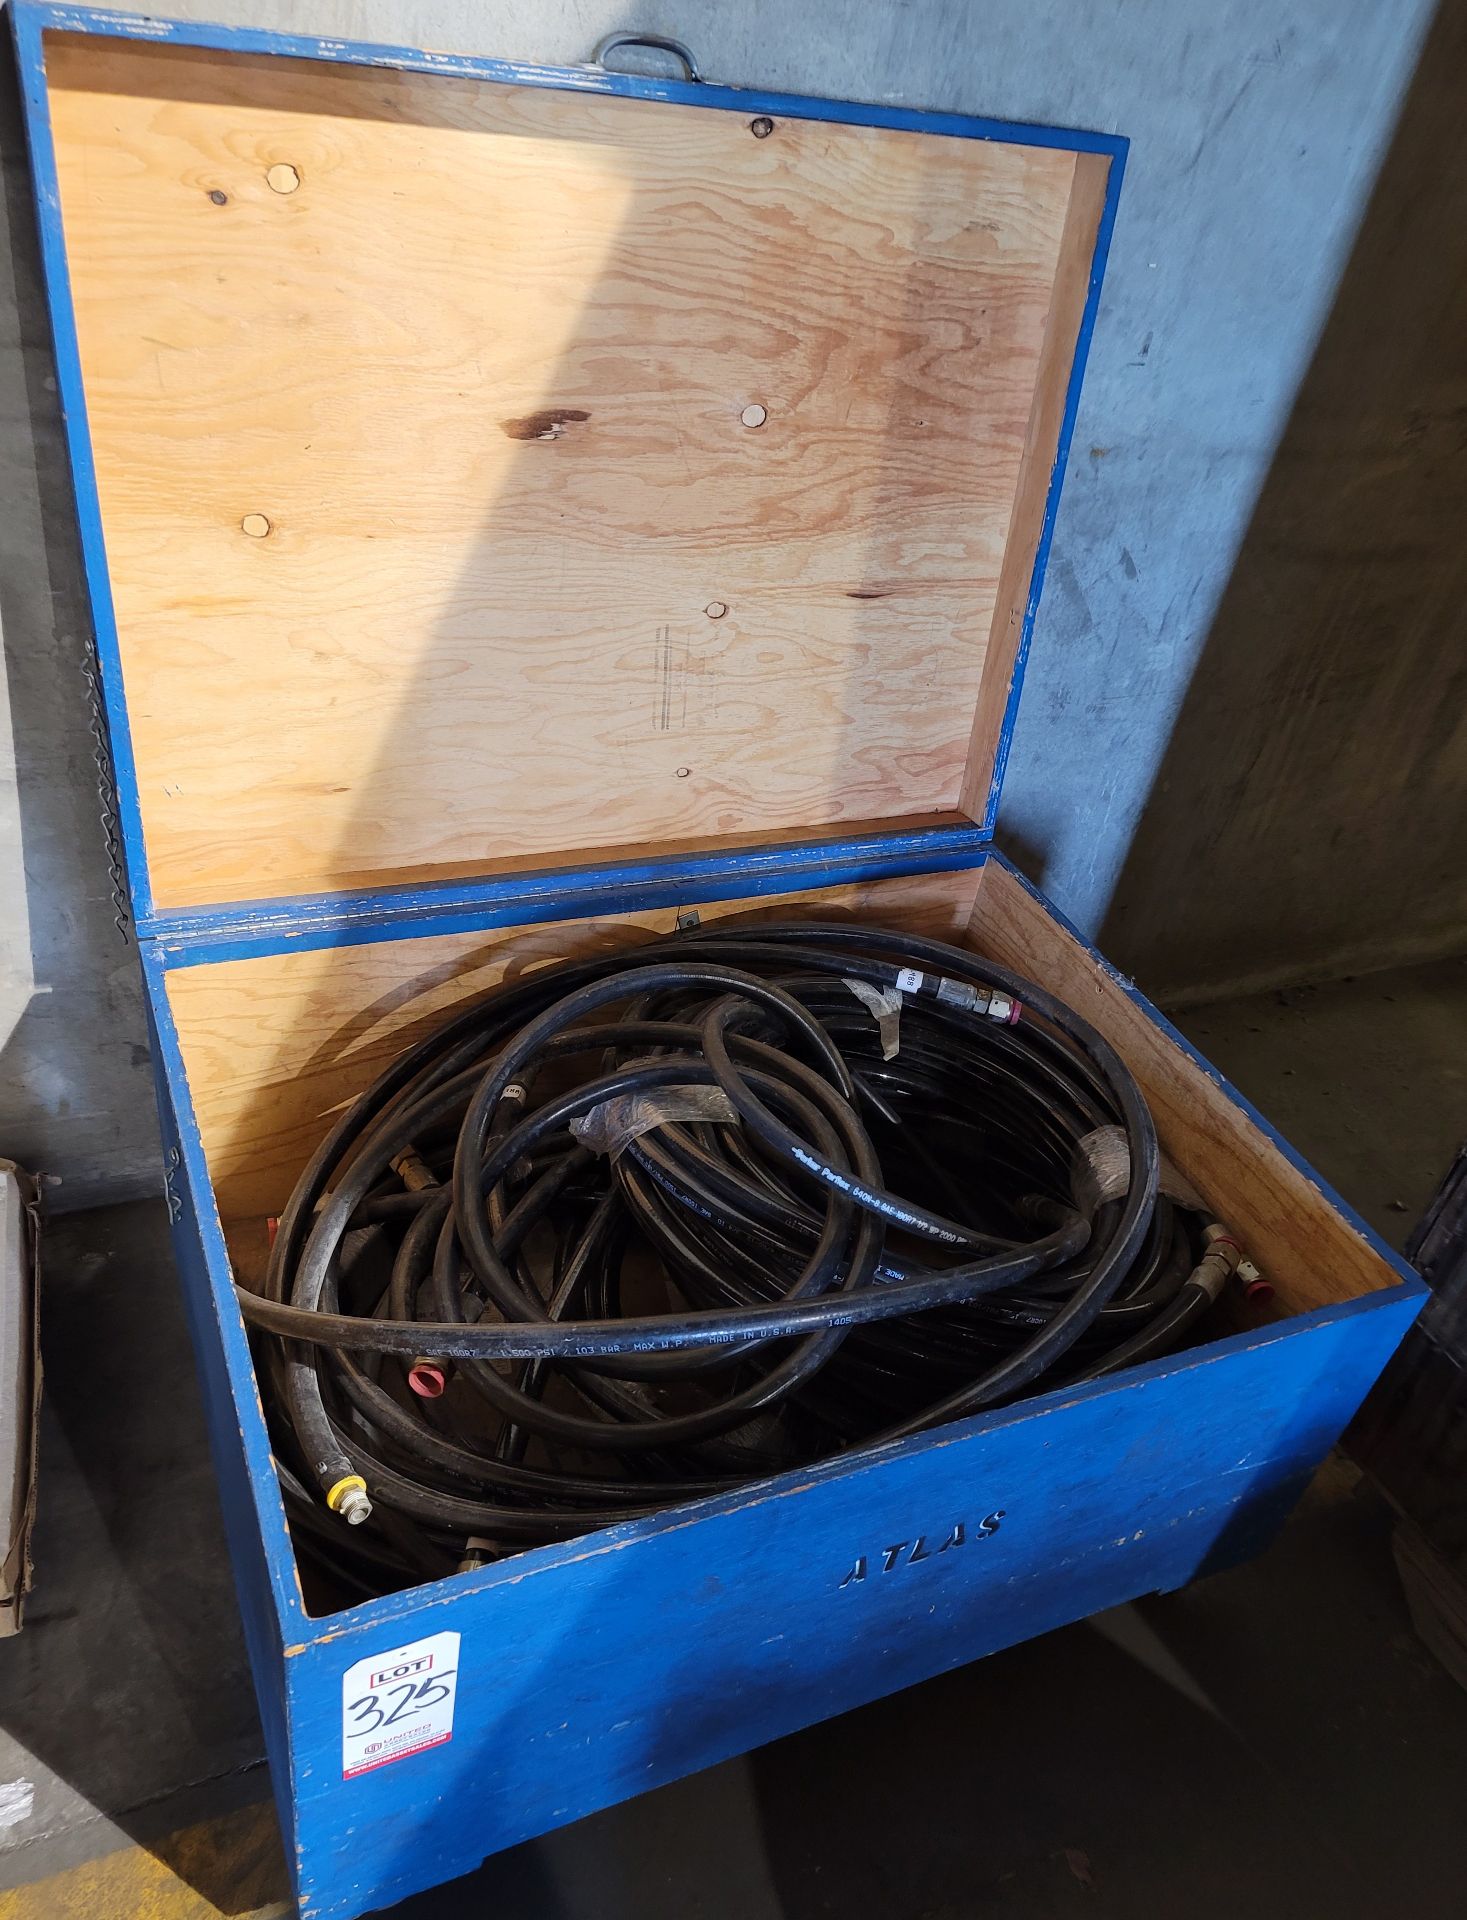 HIGH PRESSURE HOSE IN CRATE, ON CASTERS (LOCATION: BUILDING 15 MRB)